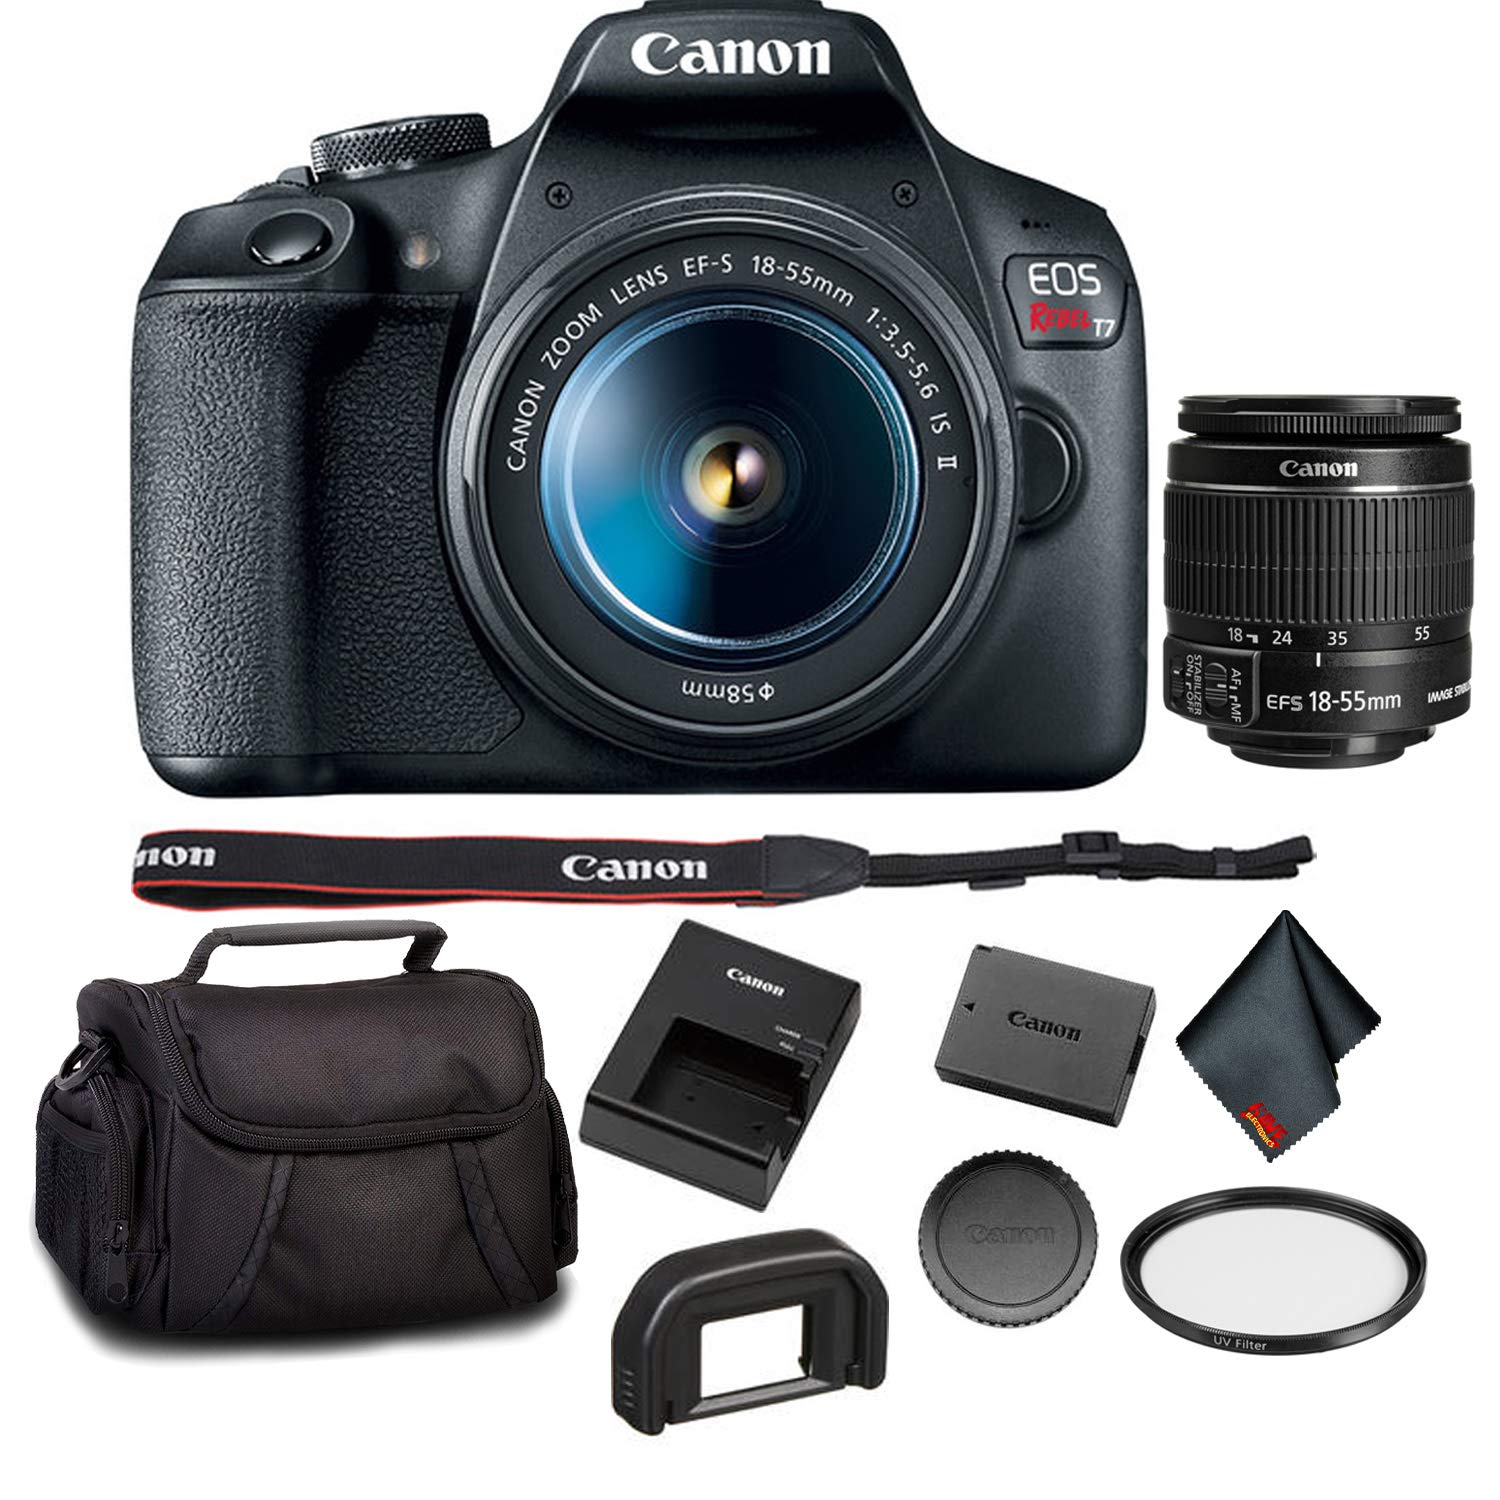 Canon EOS Rebel T7 DSLR Camera with Canon 18-55mm Lens Bundle with UV Filter + Carrying Case and More